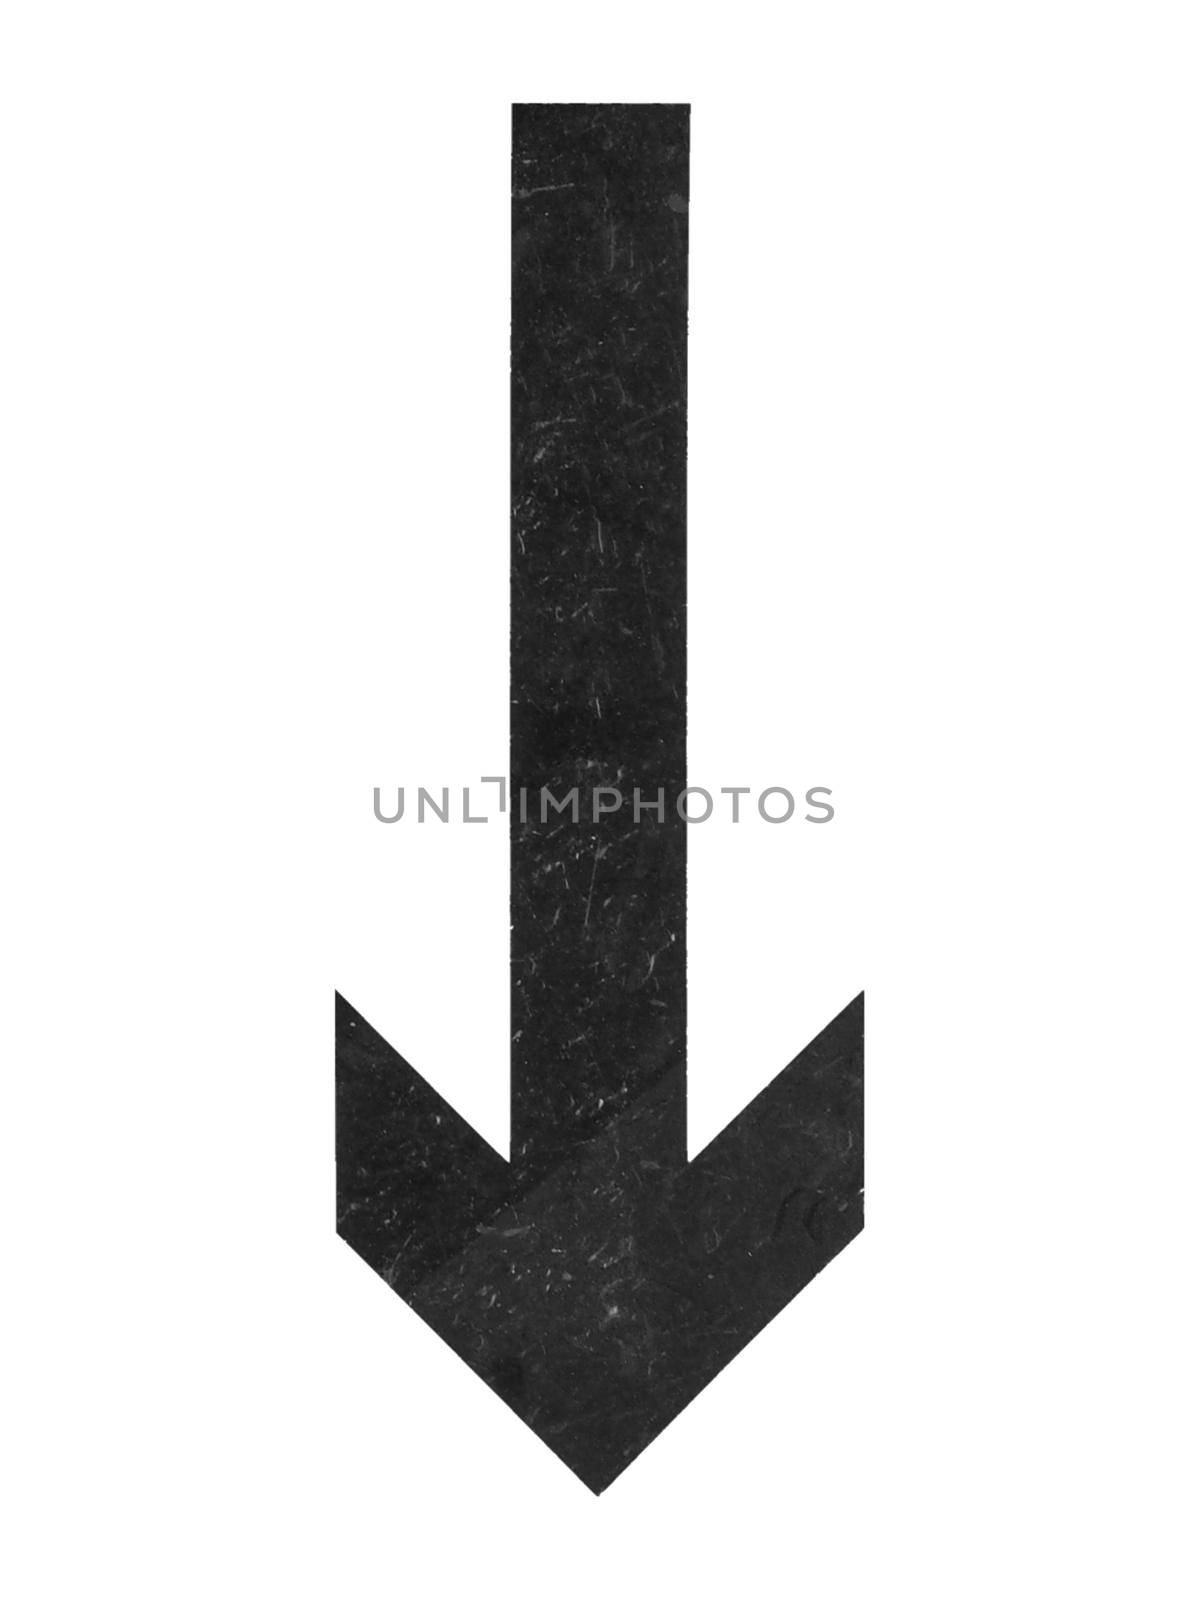 down direction arrow painted in black over white background